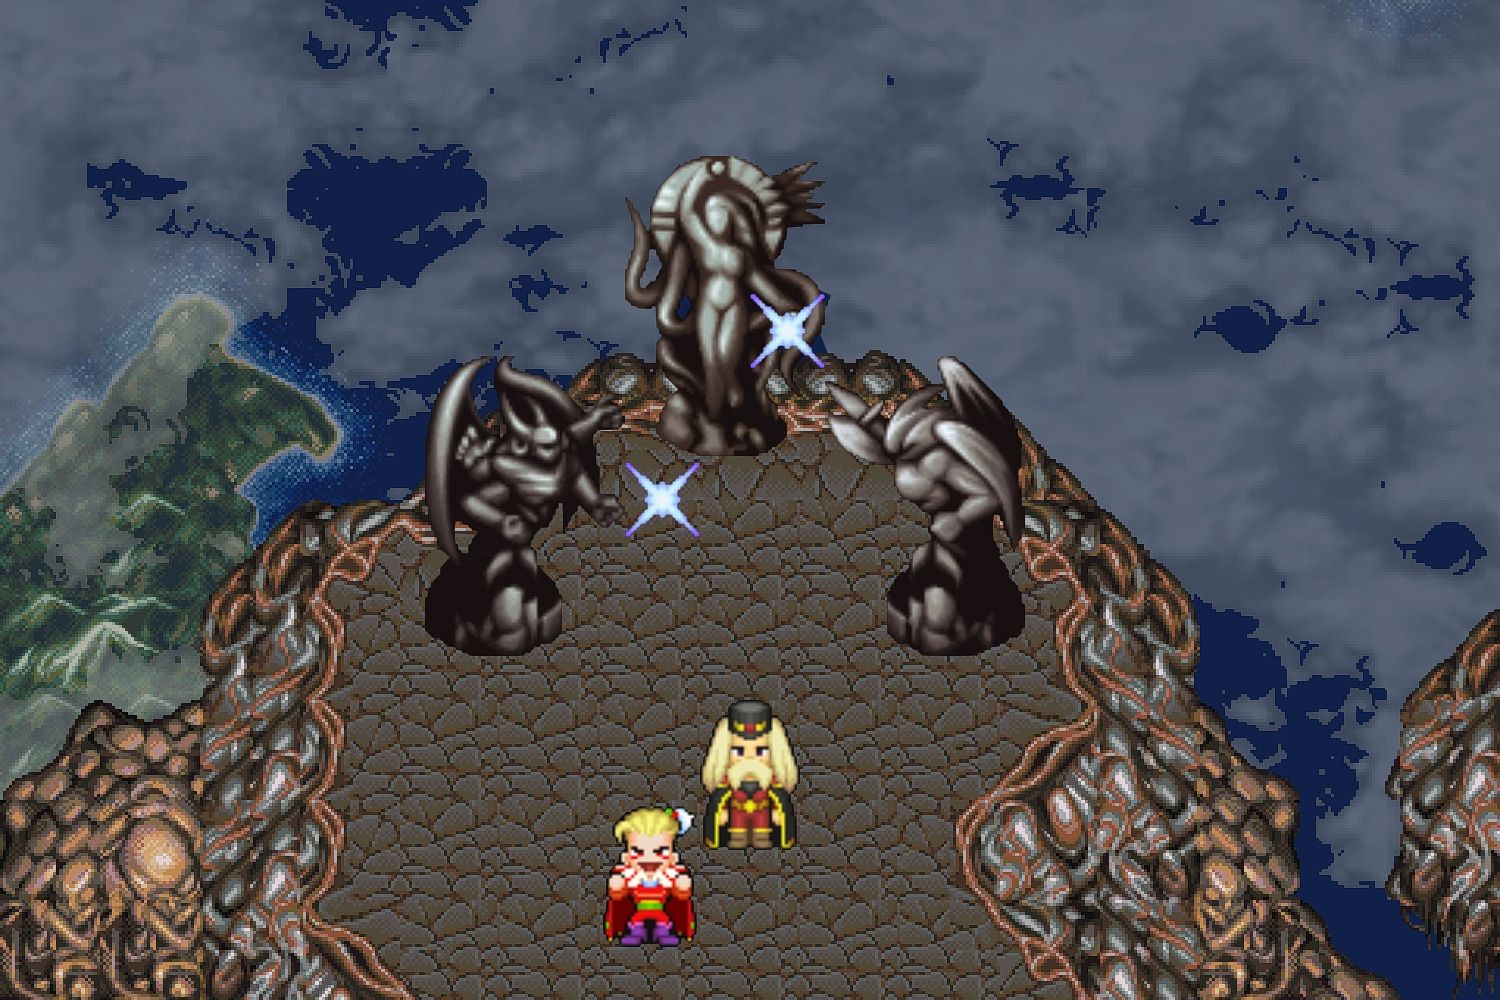 Final Fantasy The 10 Worst Things Kefka Has Done